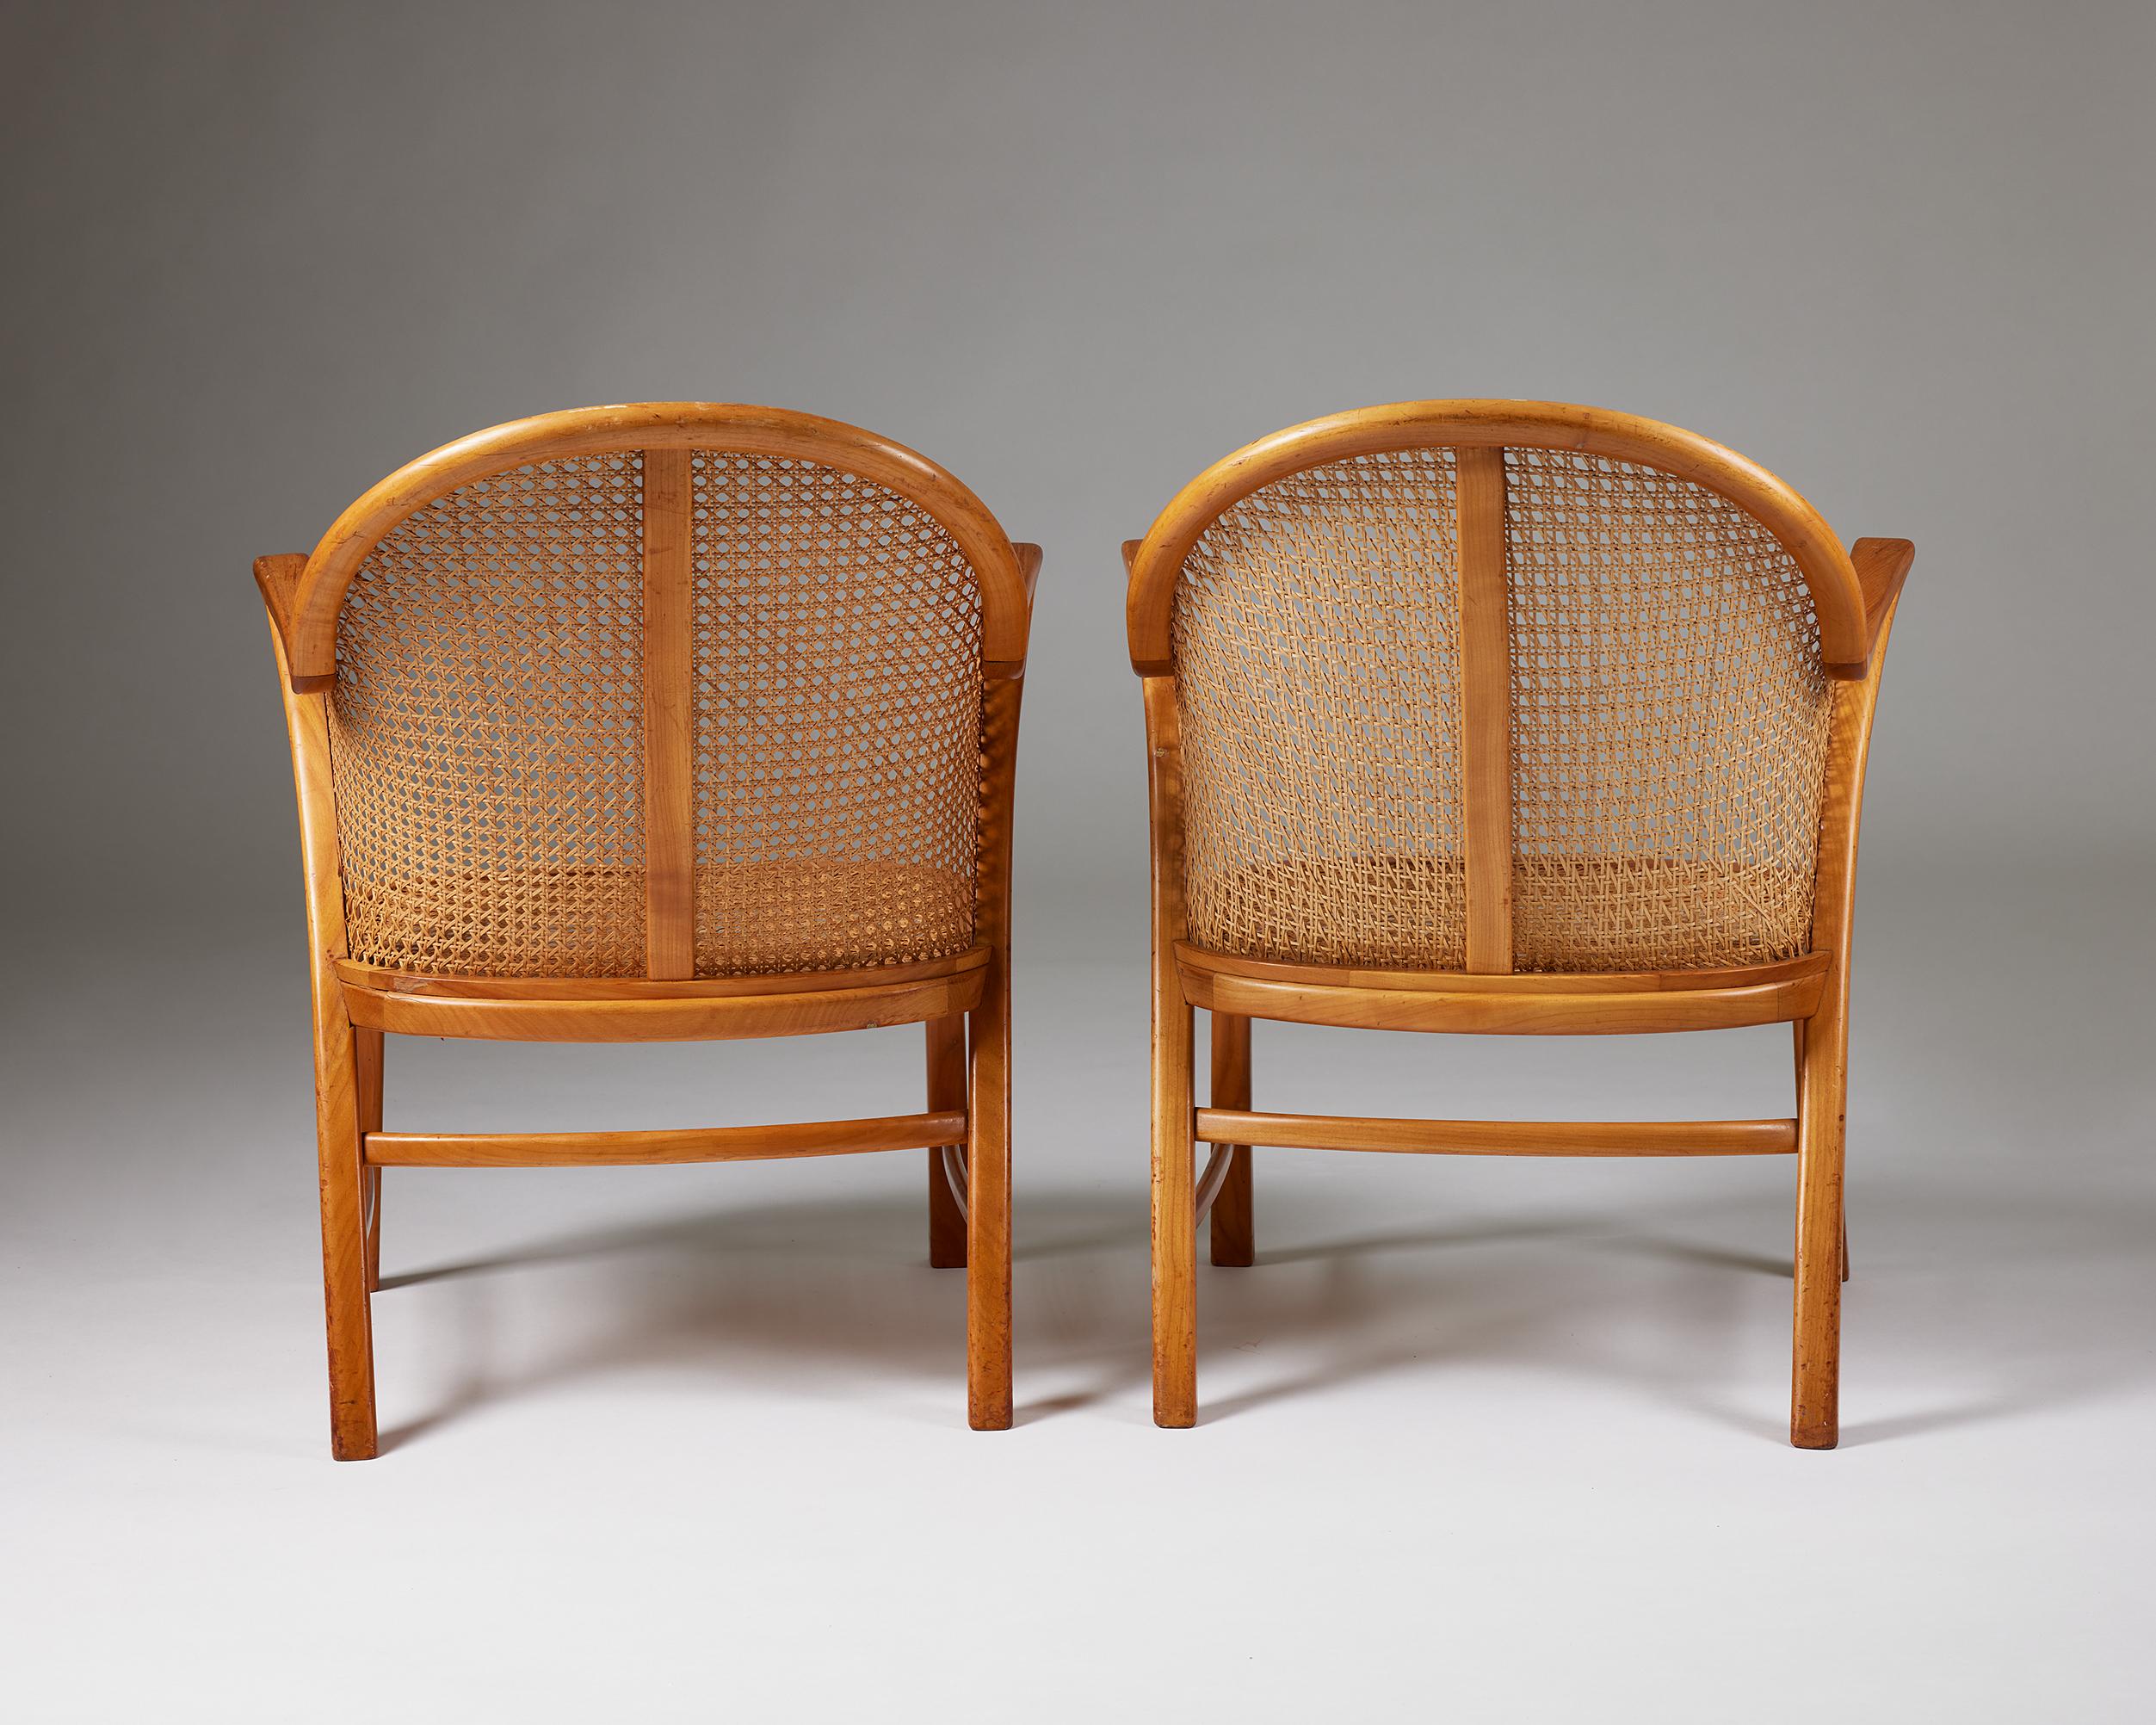 Rattan Pair of Armchairs Attributed to Frits Schlegel, Denmark, 1930s-1940s